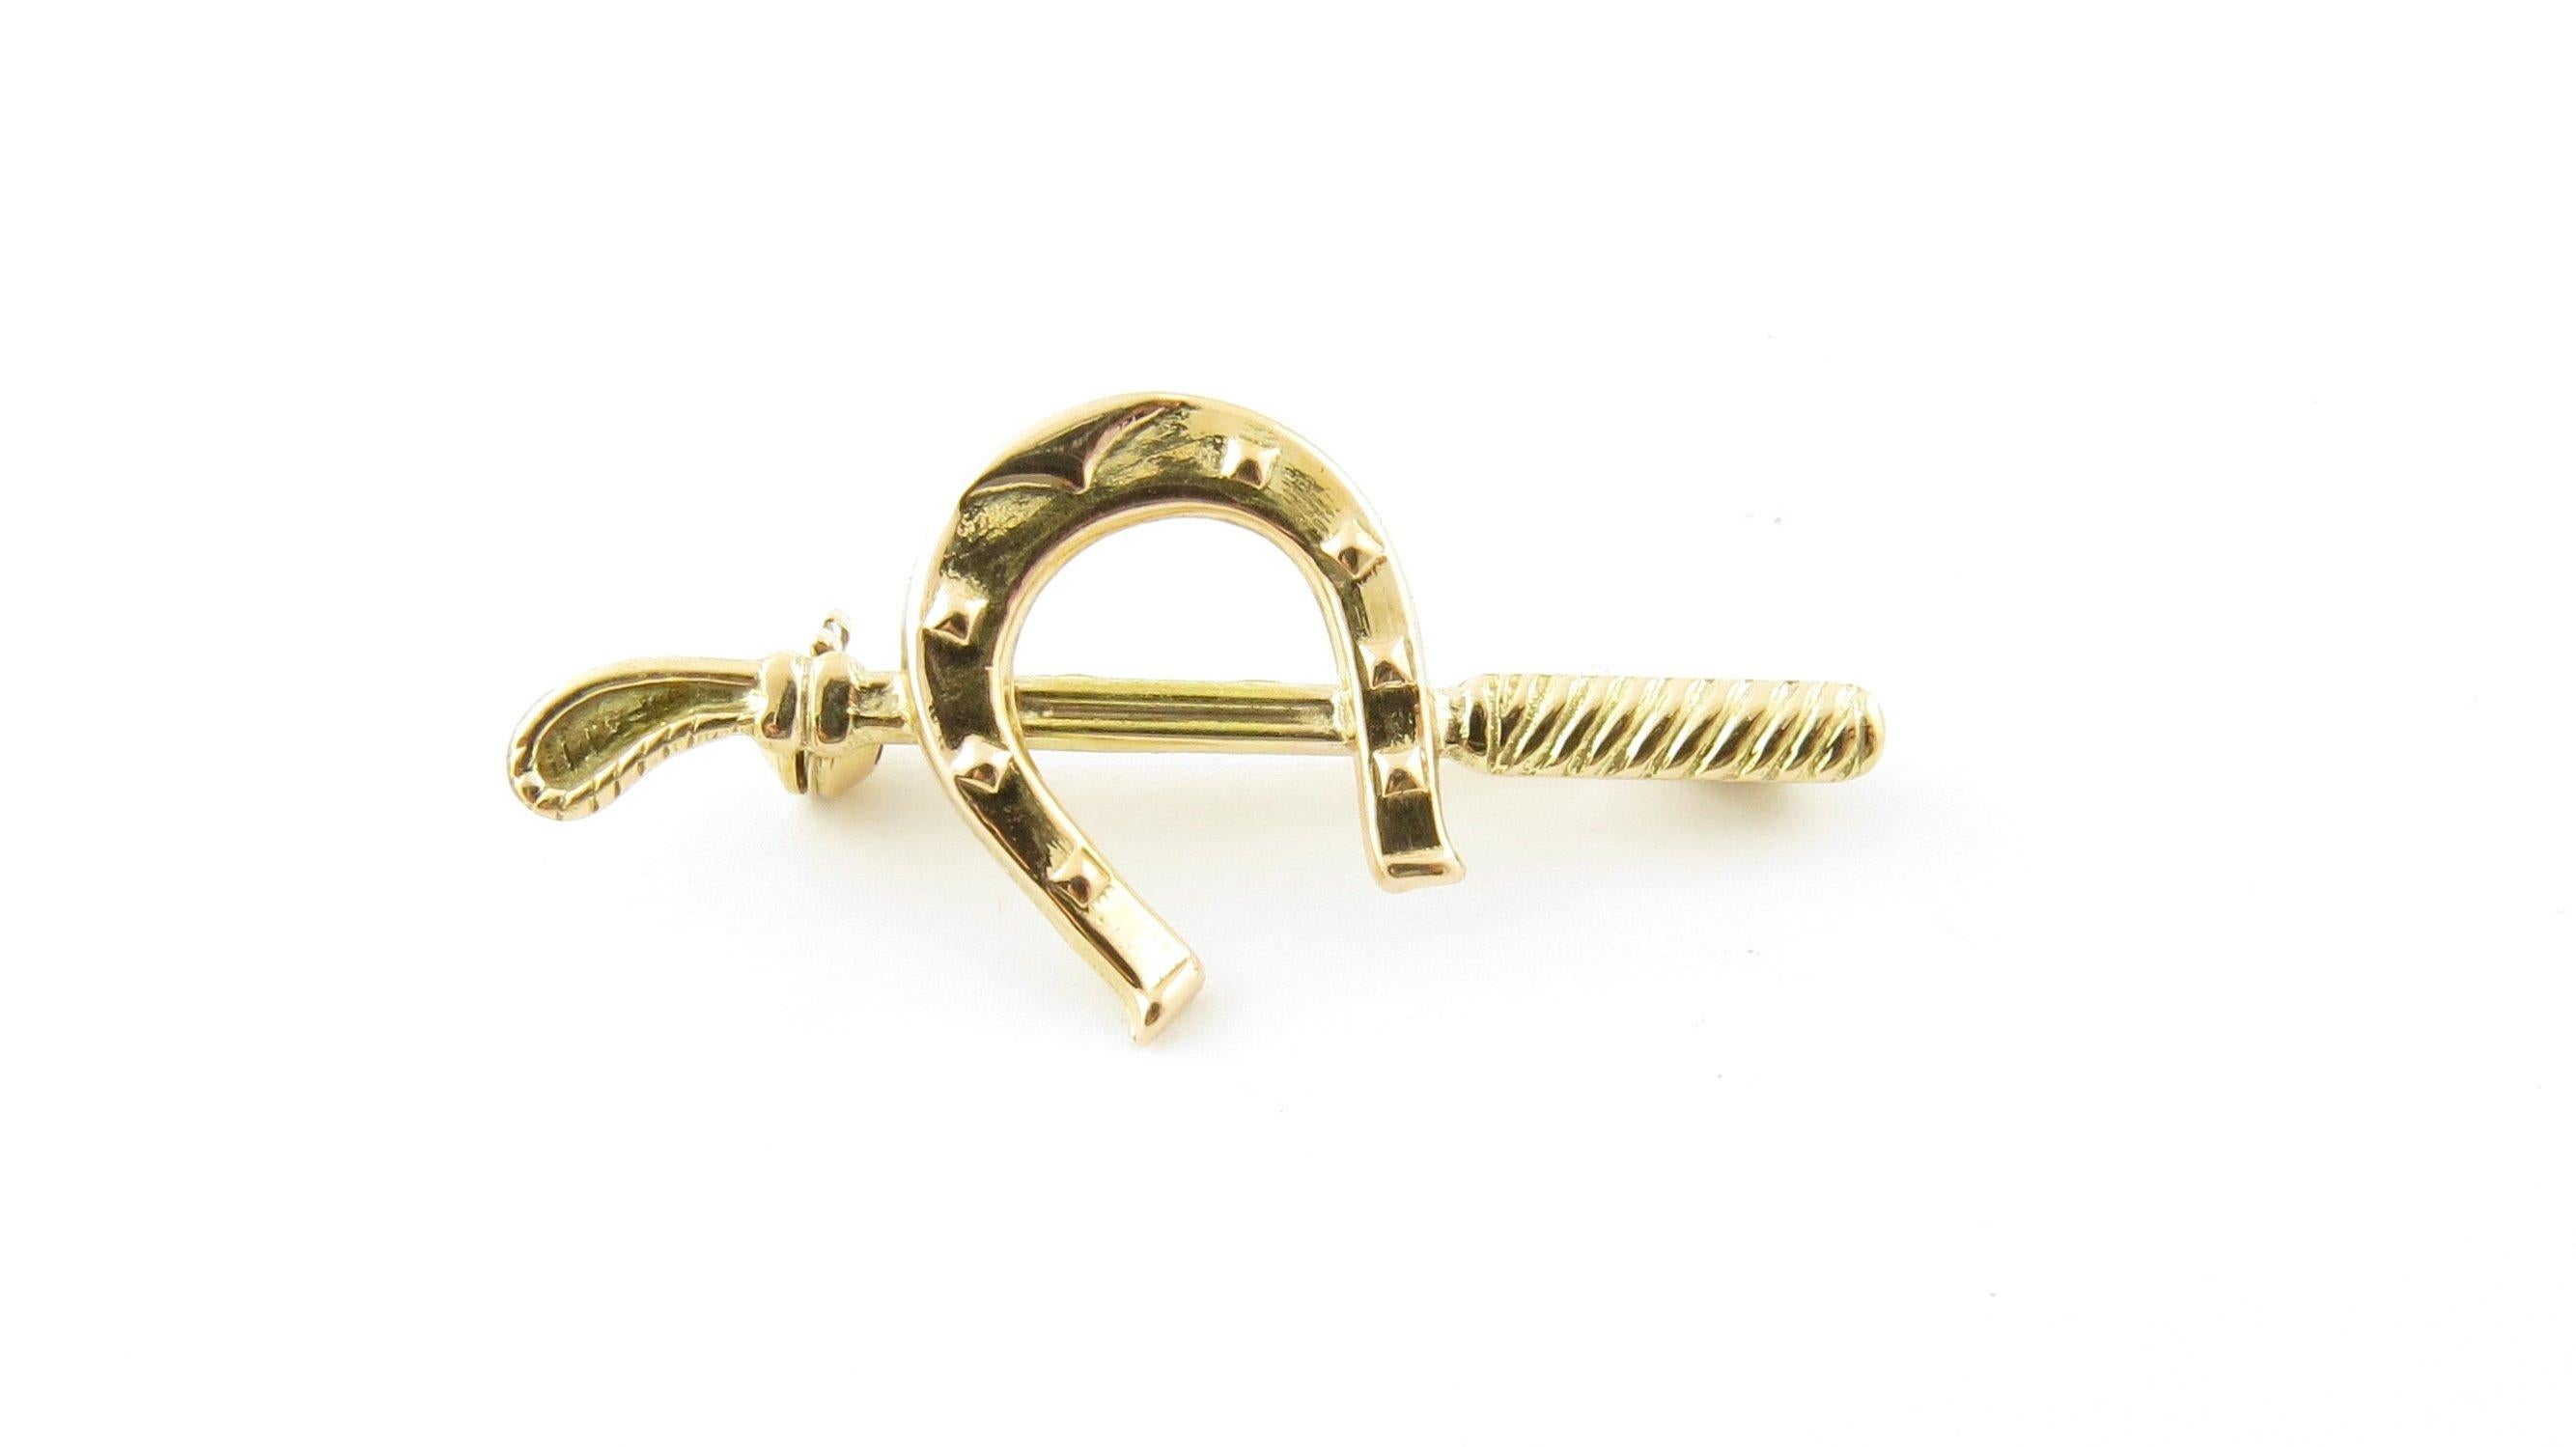 Vintage 18 Karat Yellow Gold Horseshoe and Riding Crop Pin/Brooch- Perfect gift for the equestrian in your life! This lovely brooch features a horseshoe and riding crop meticulously detailed in 18K yellow gold. Size: 39 mm x 18 mm Weight: 1.6 dwt. /